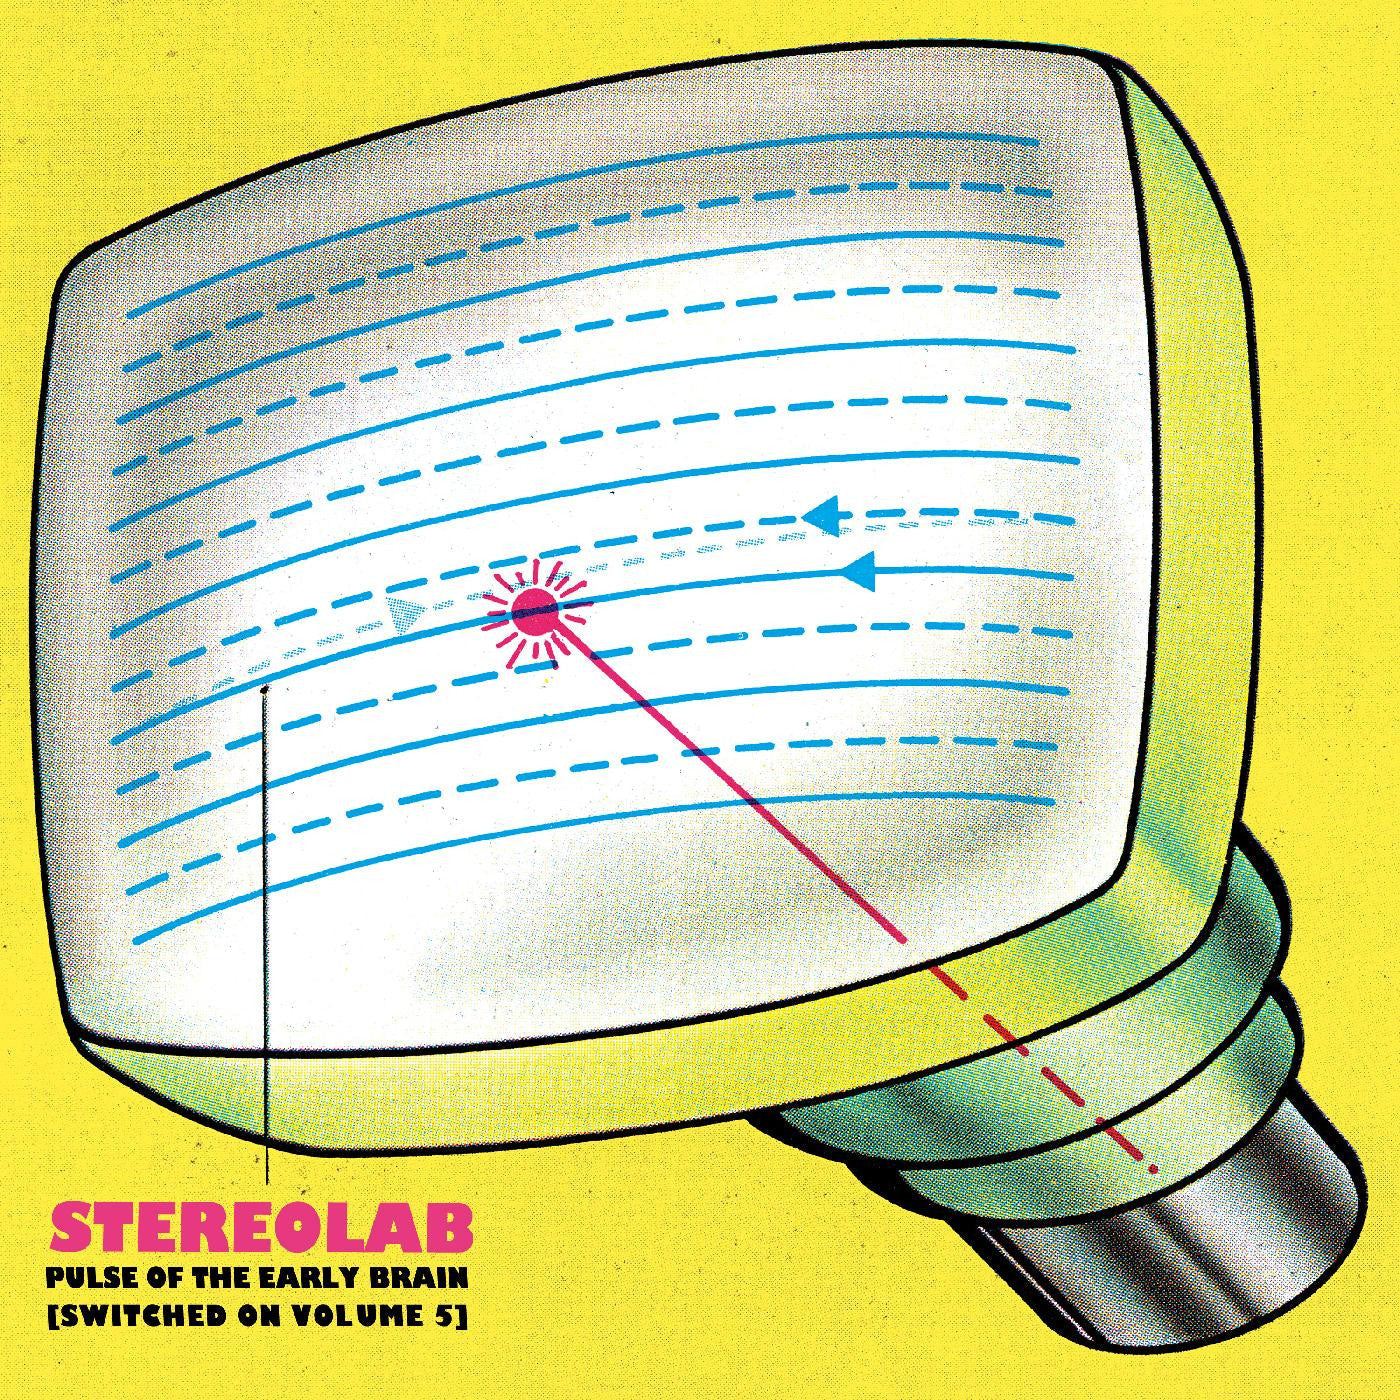 Stereolab - Pulse Of The Early Brain (Switched On Volume 5) - LP